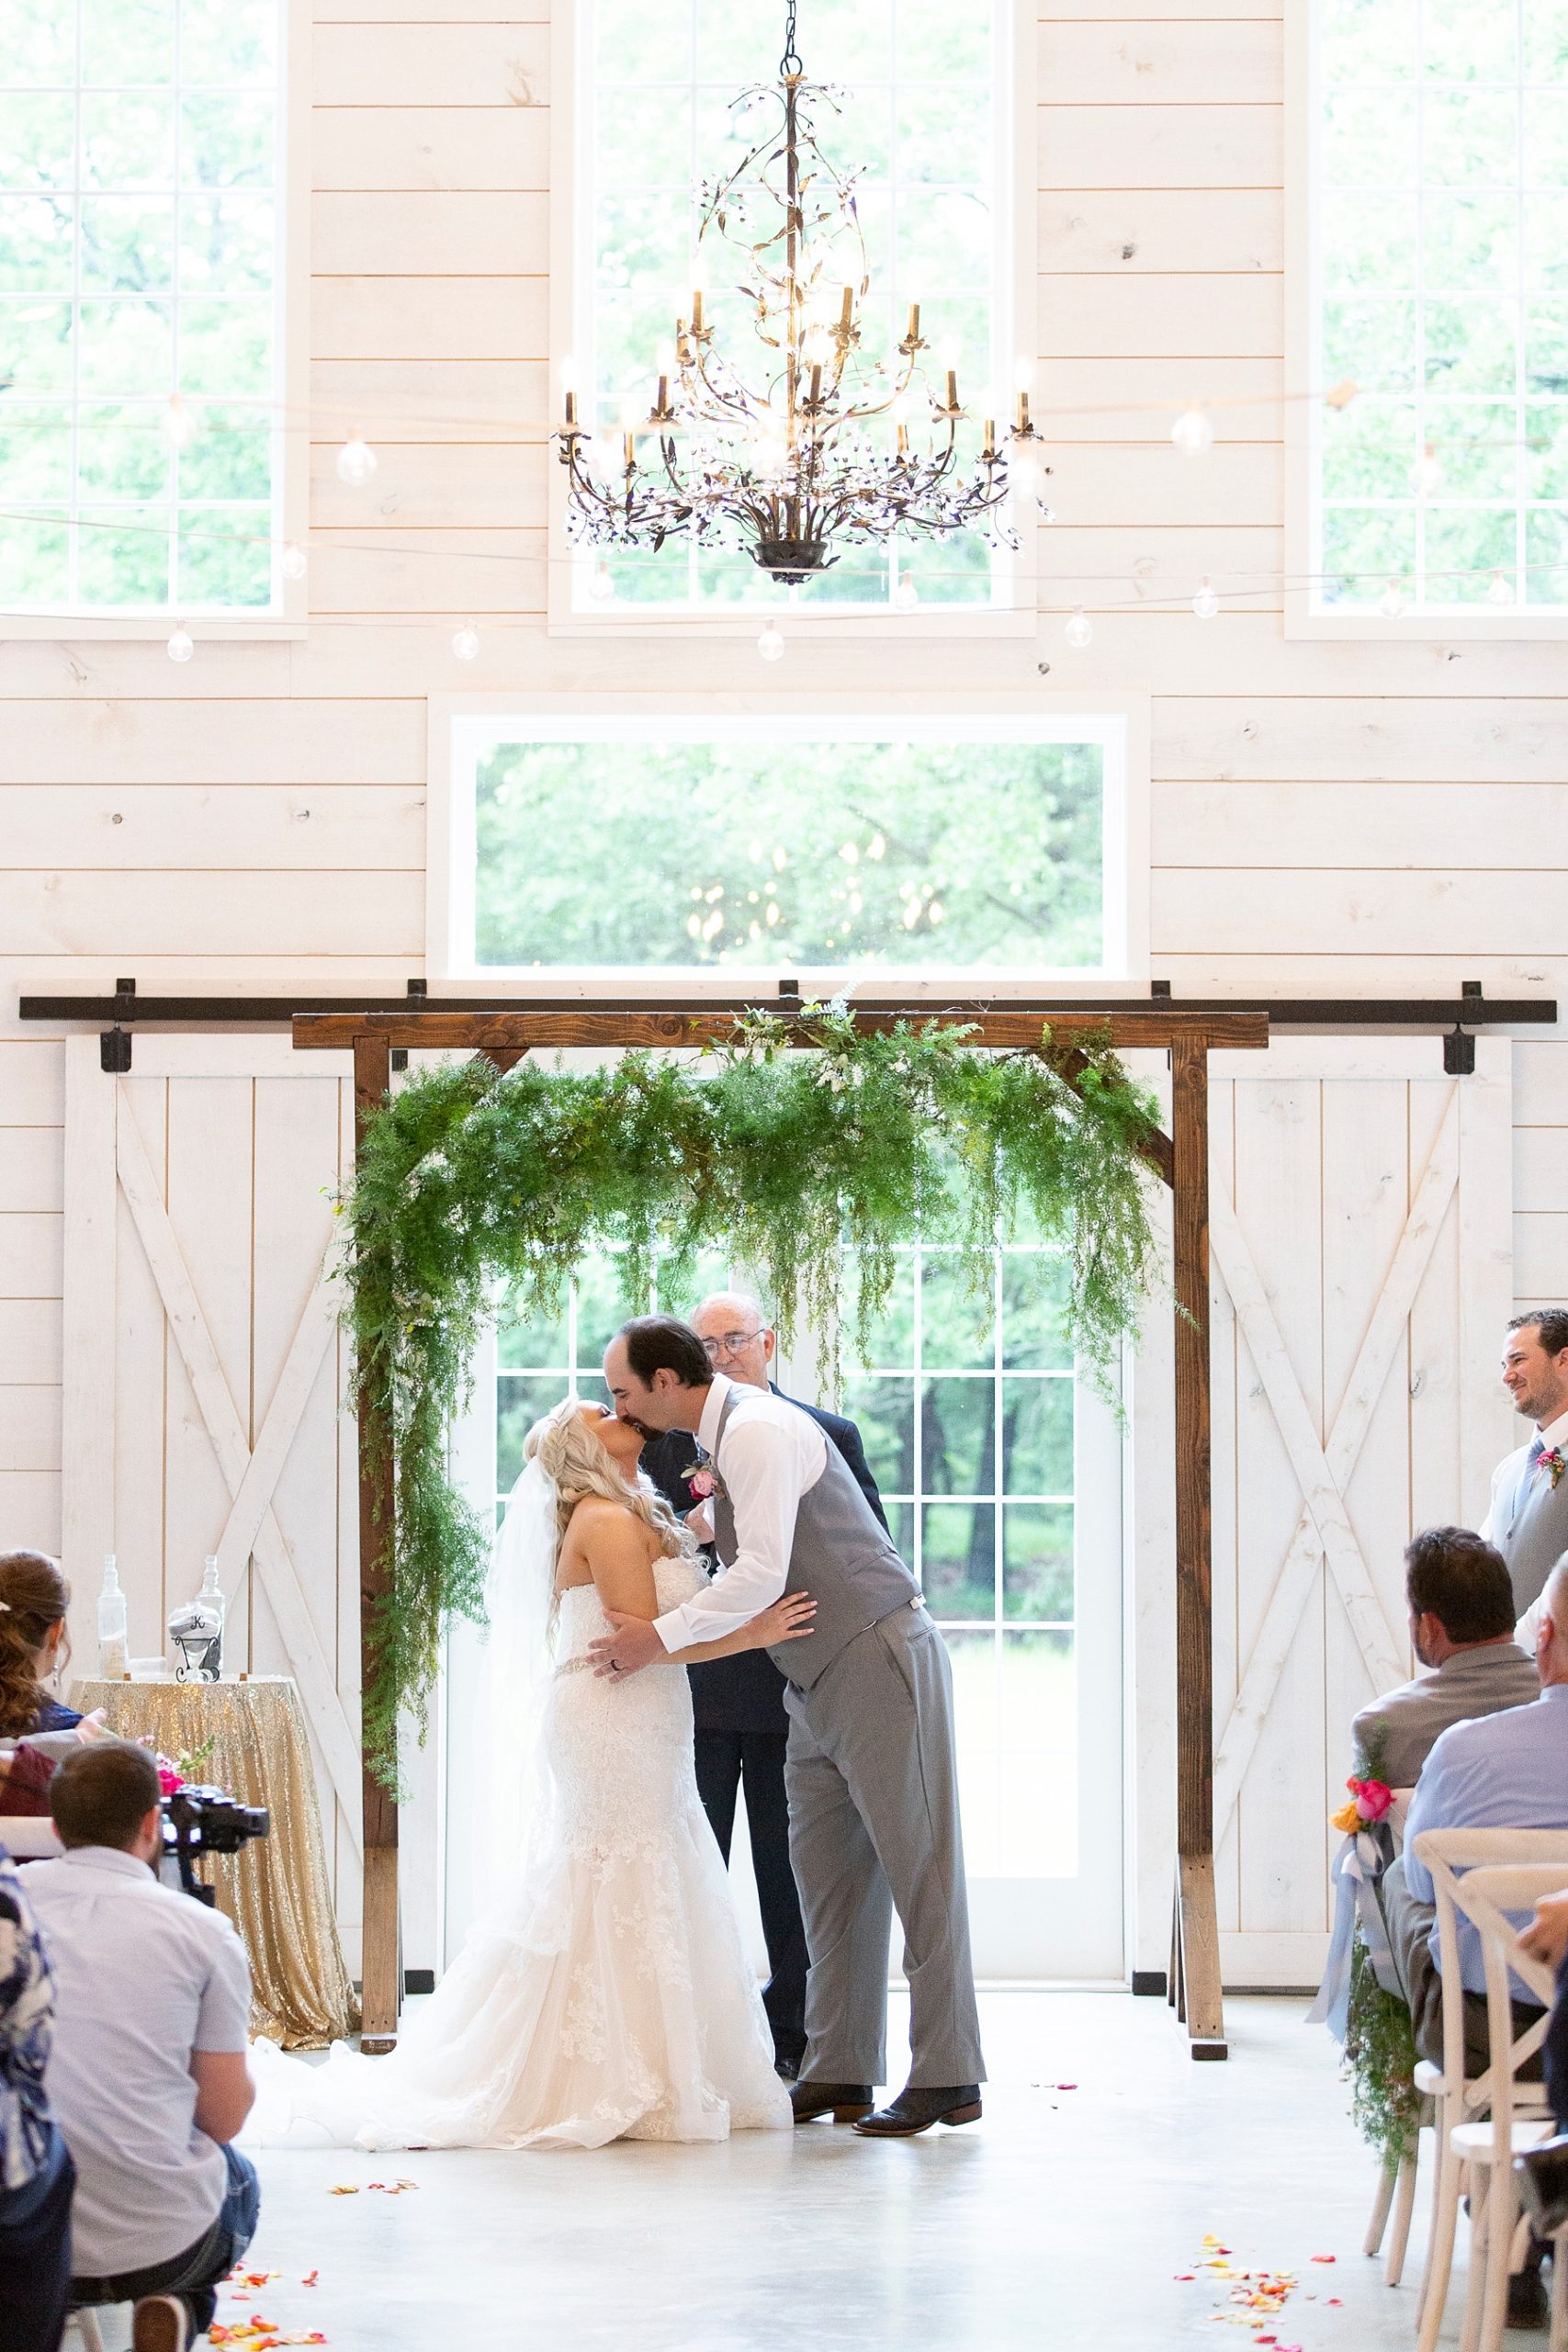 first kiss as husband and wife under greenery on wooden arch photographed by Randi Michelle Weddings